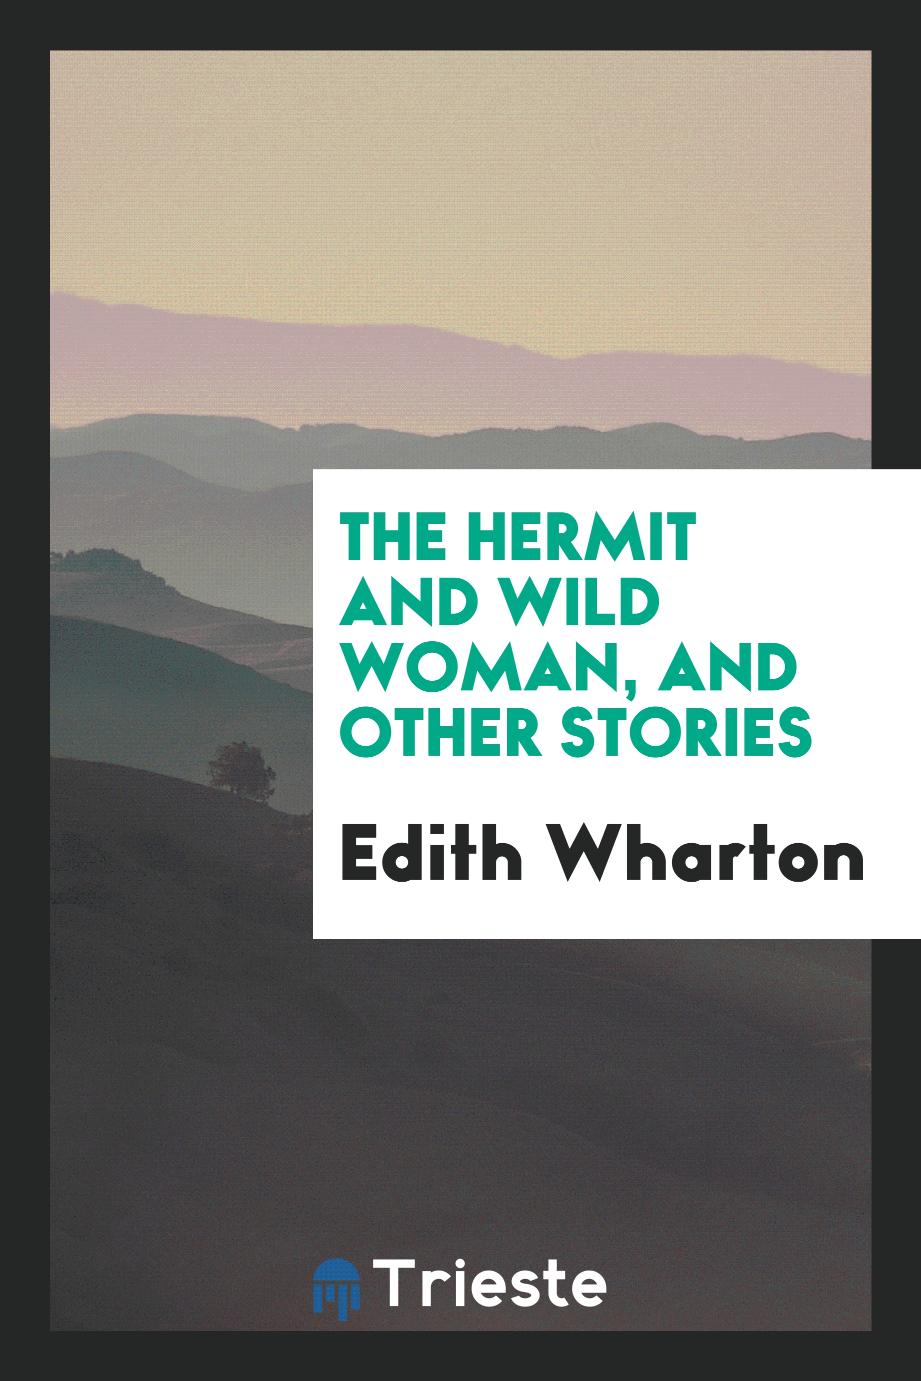 The hermit and wild woman, and other stories